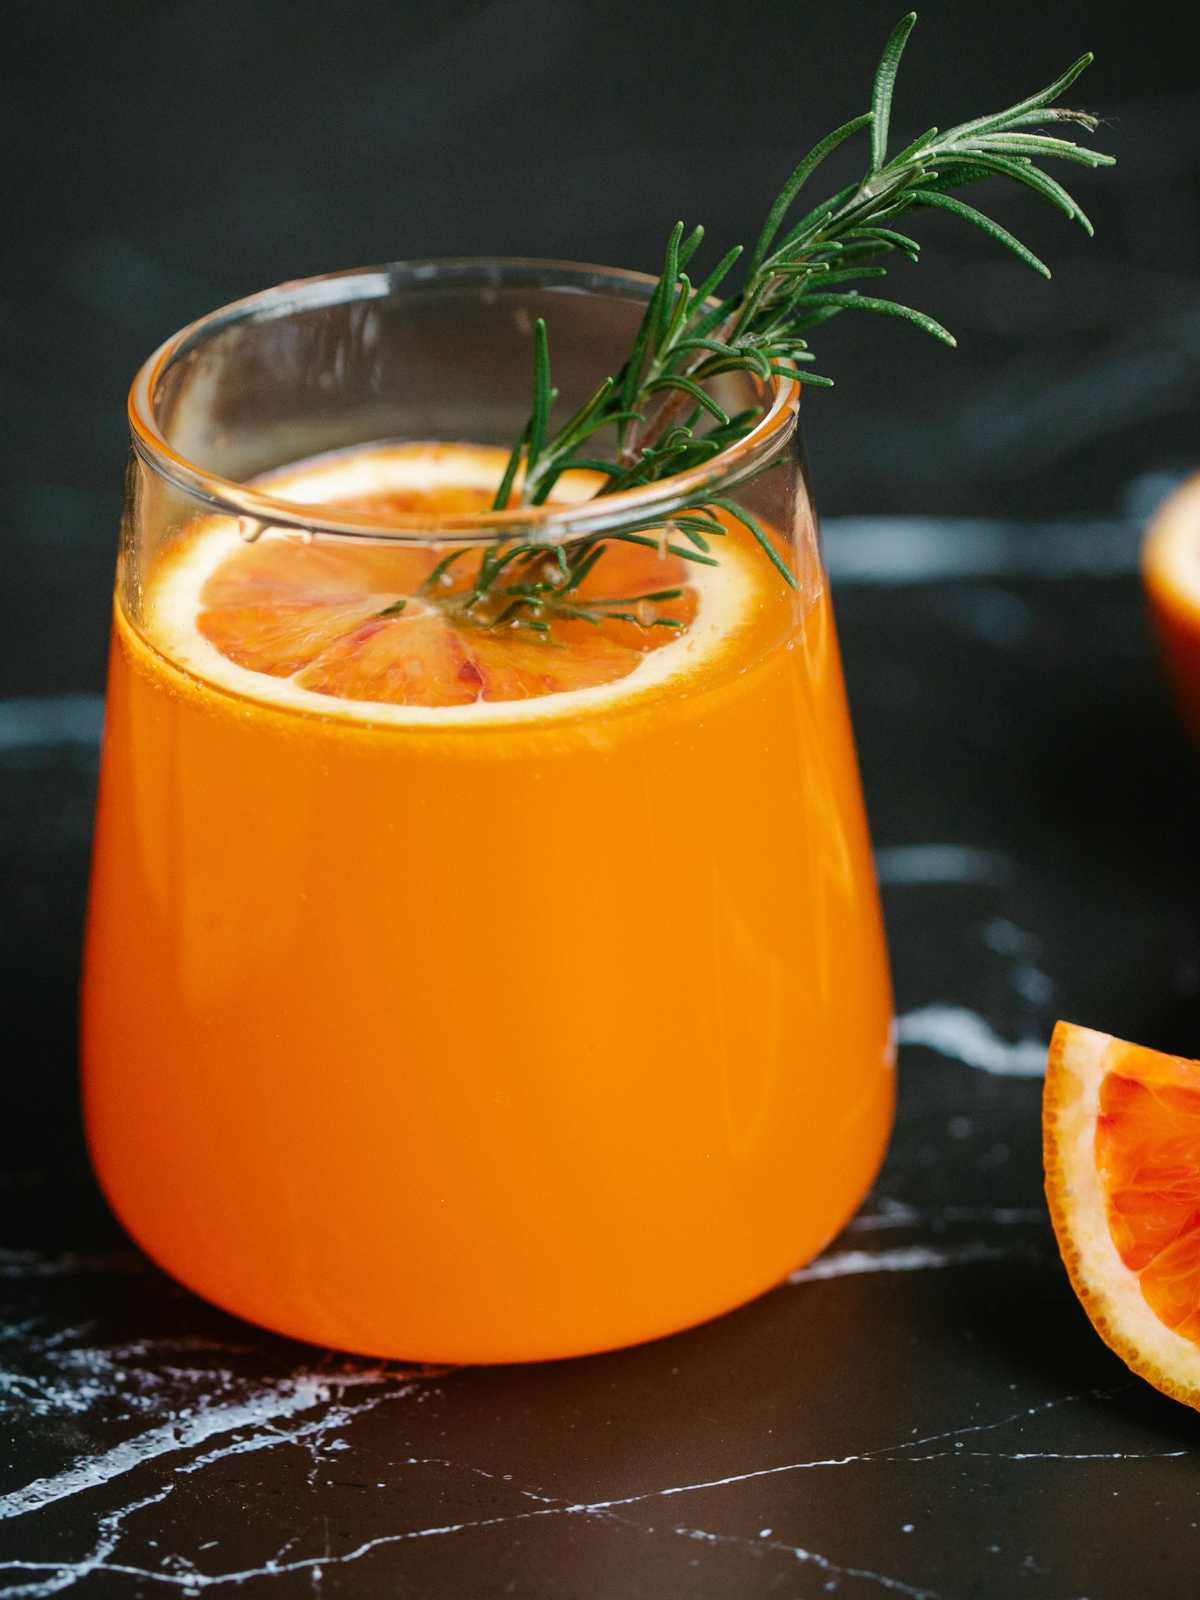 A dried orange slice floating in a glass of juice as garnish.